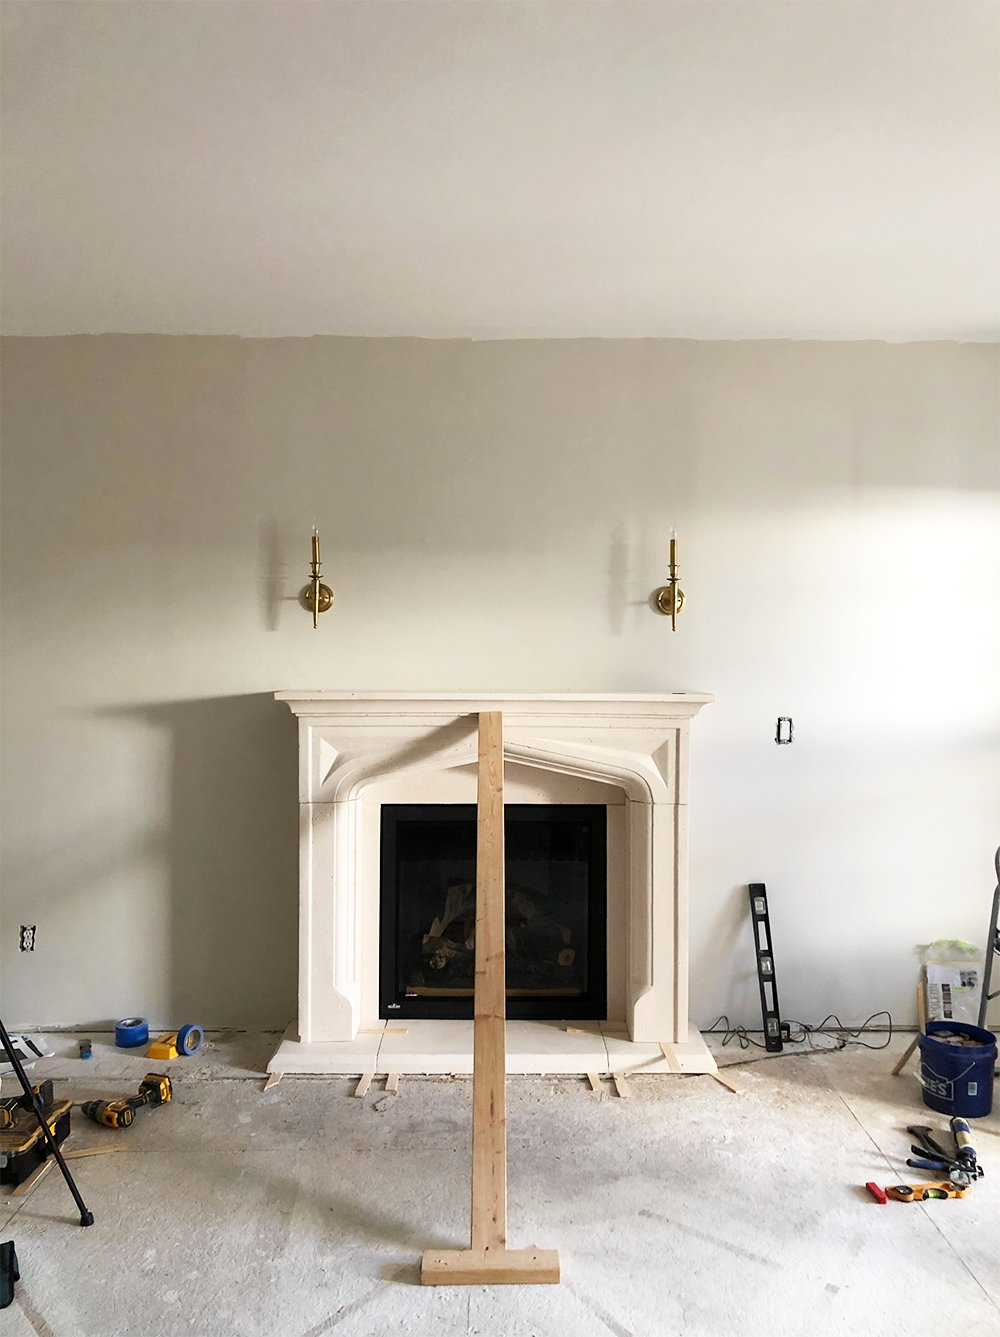 Fireplace Makeover + Cast Mantel Options - roomfortuesday.com